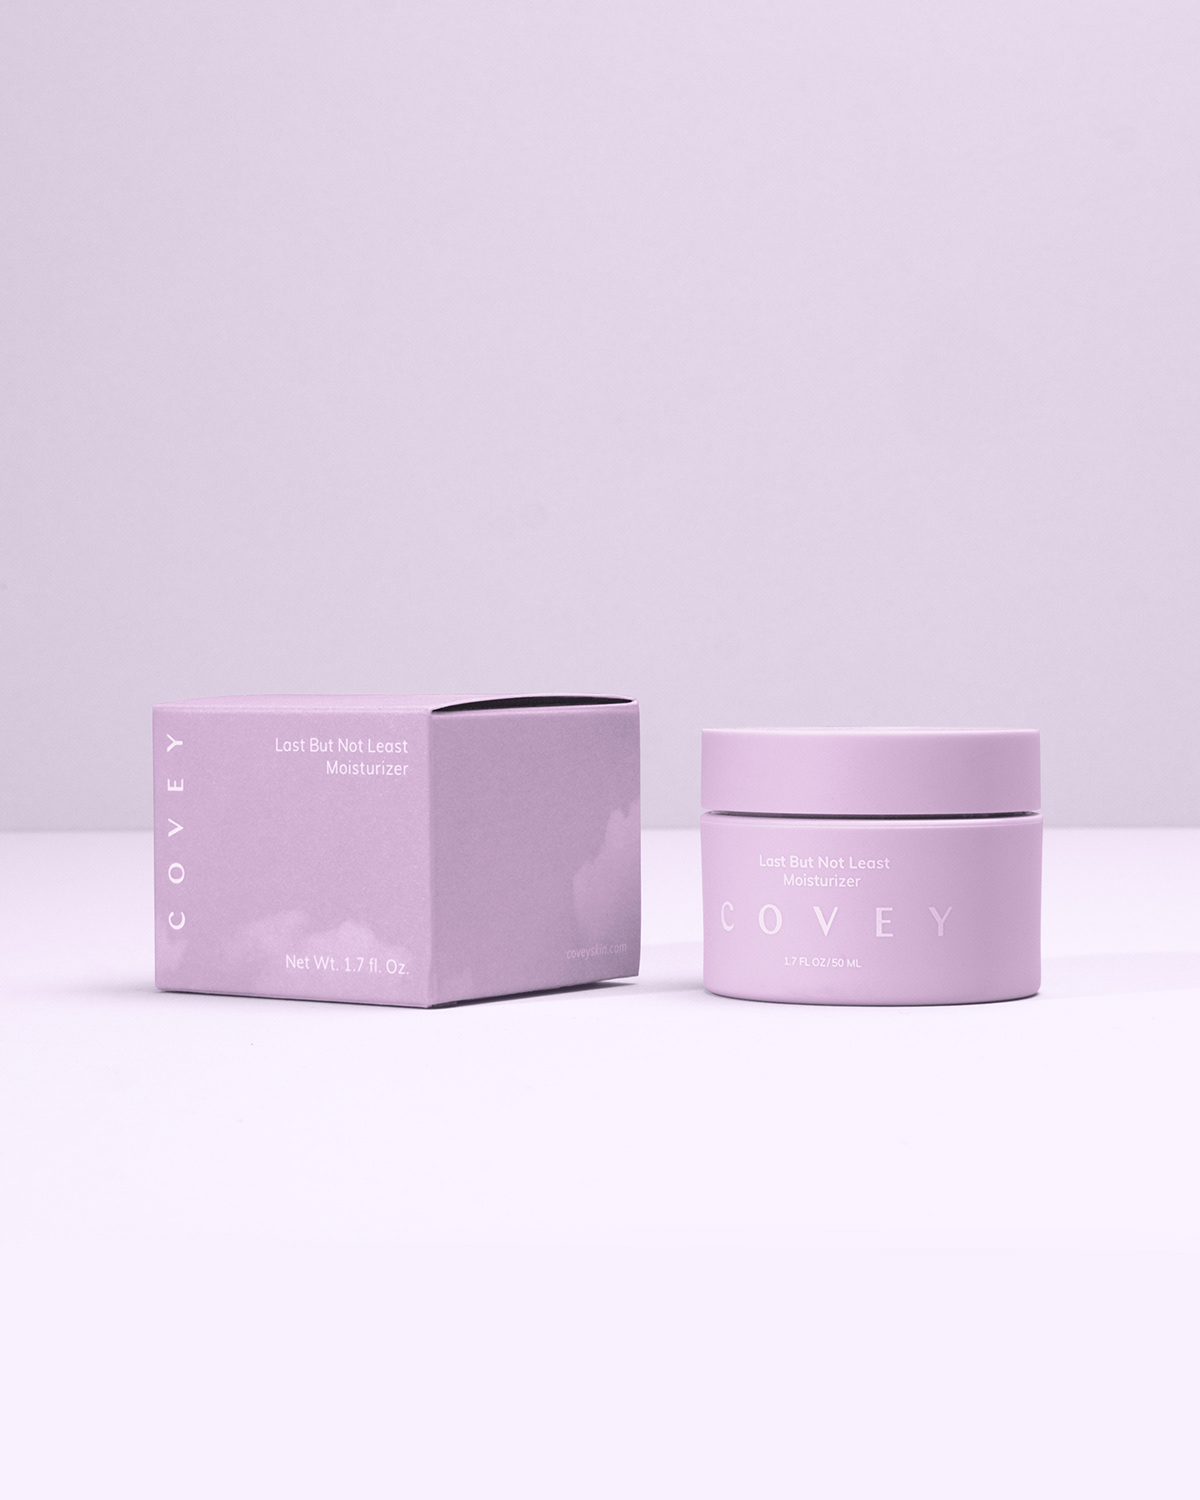 beauty clouds minimal minimalist Packaging packaging design packagingdesign skincare Skincare packaging Skincare Products